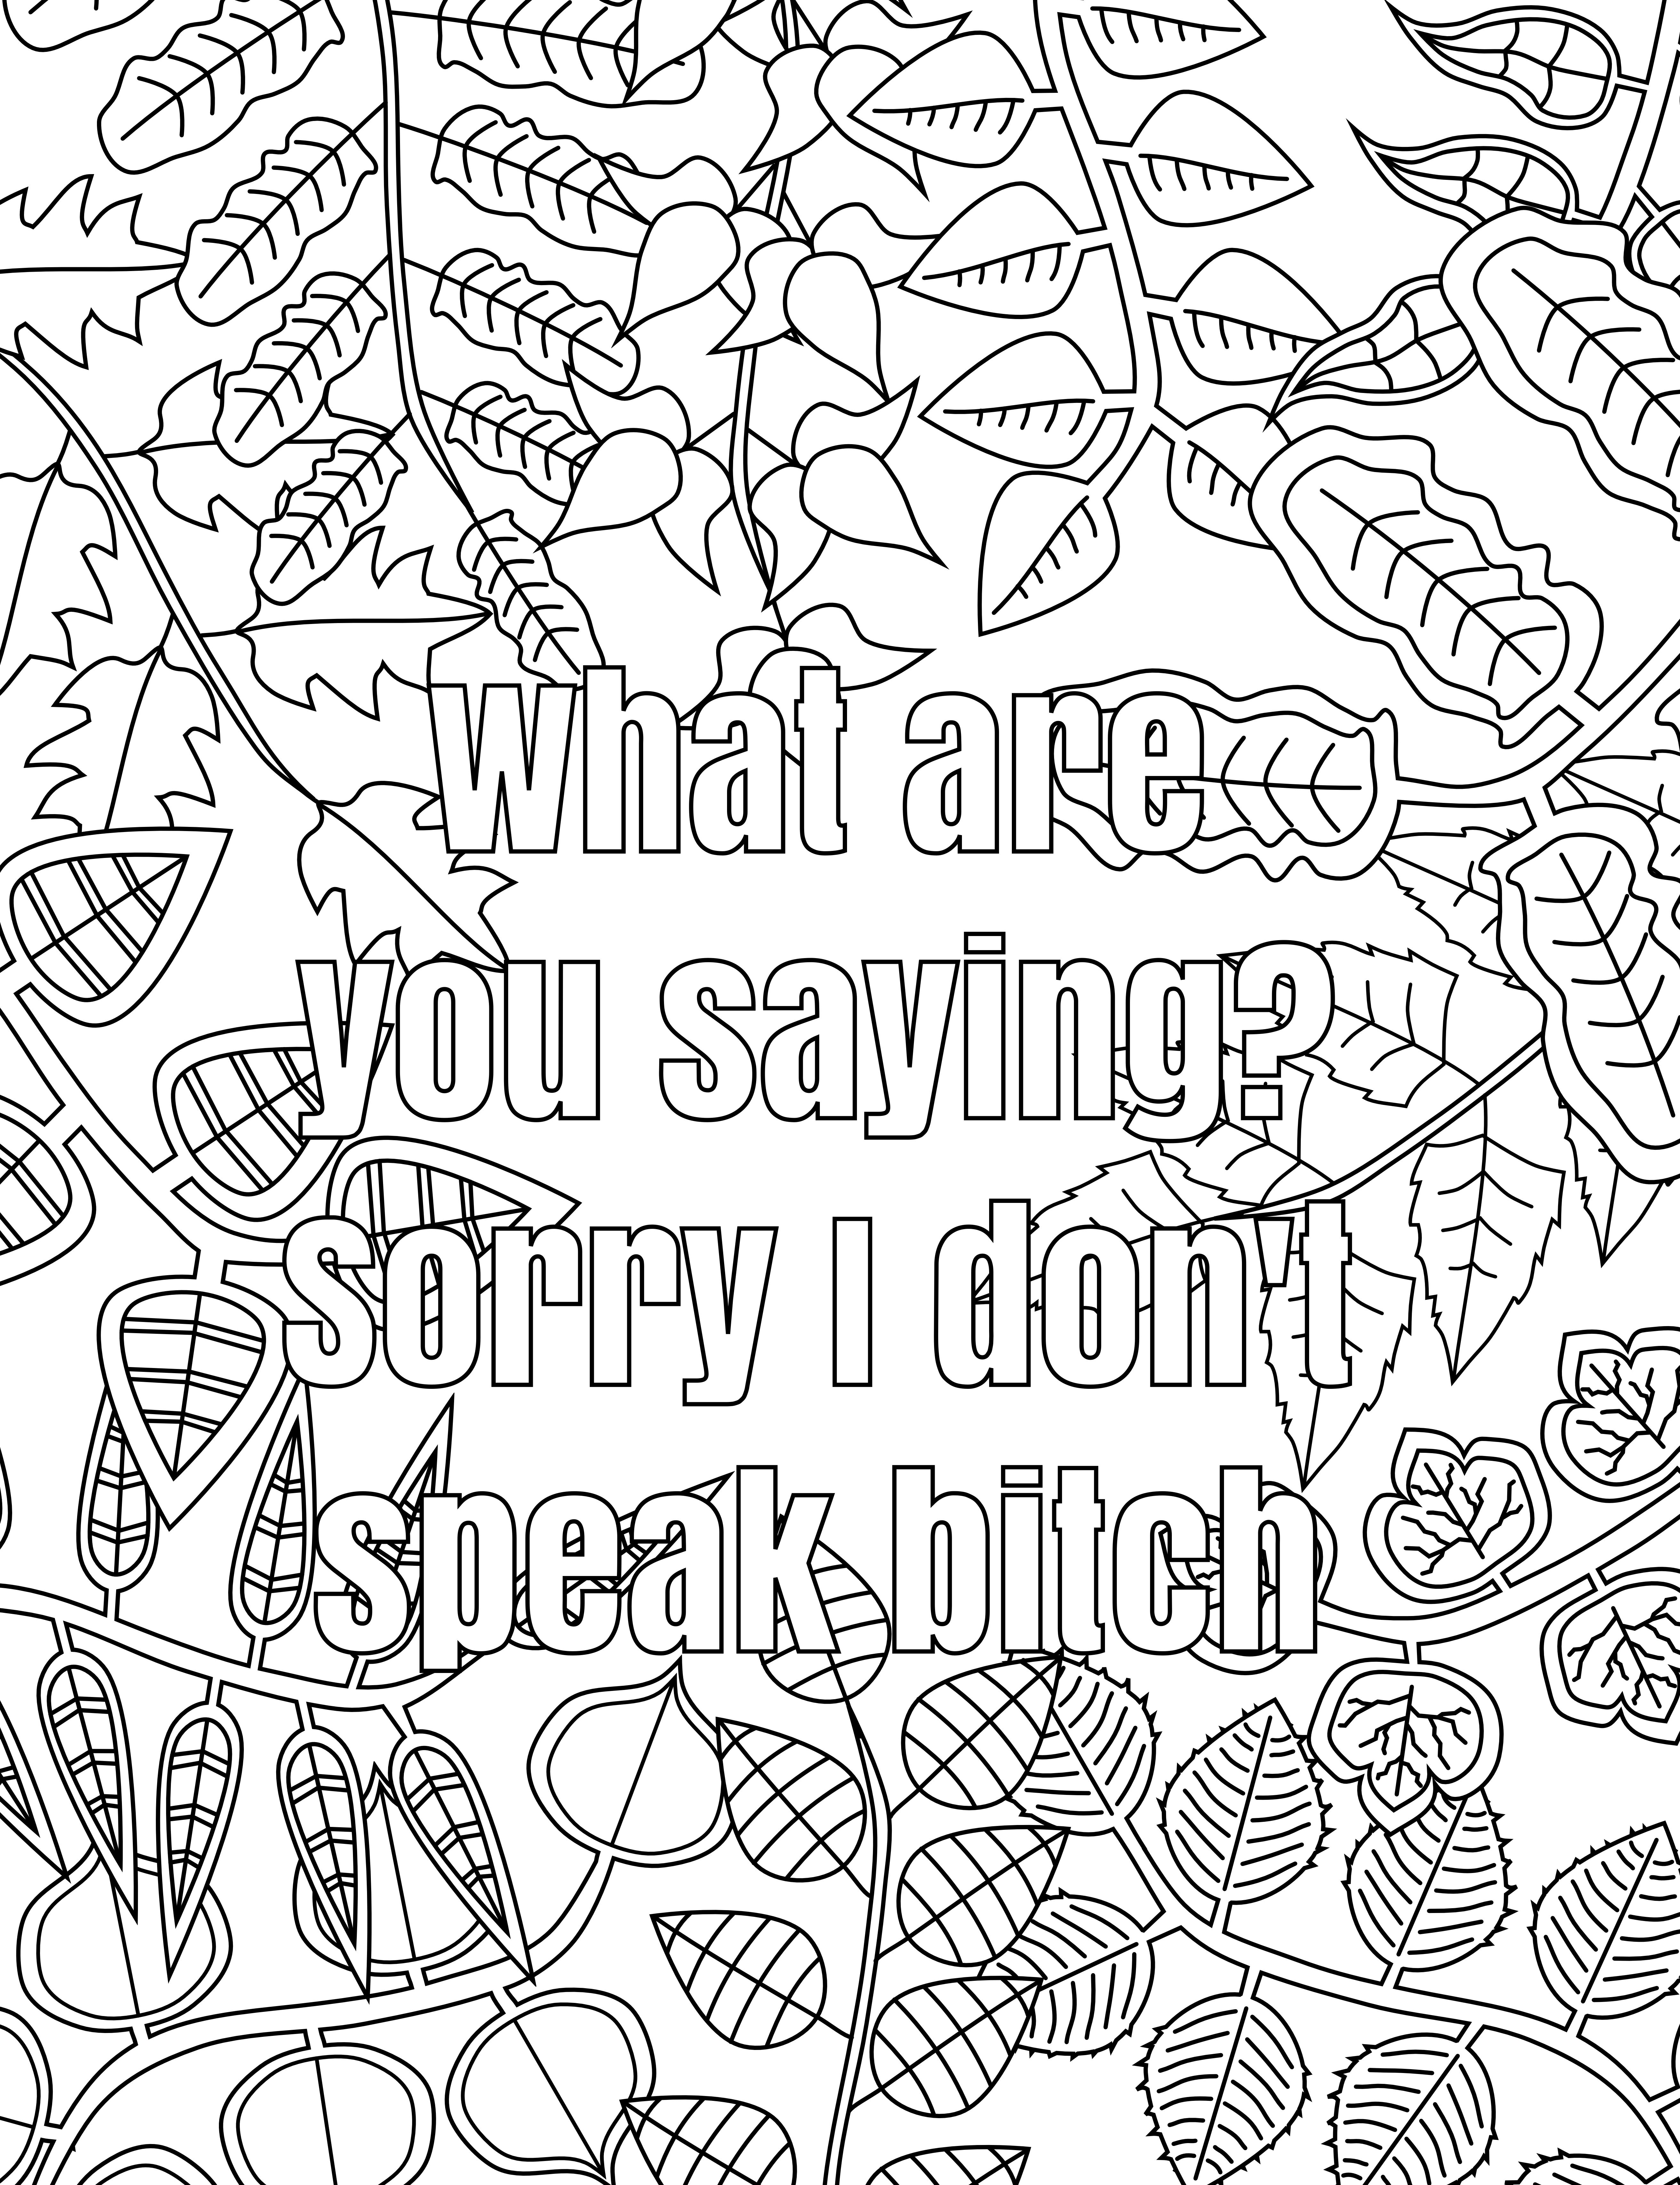 Free Printable Coloring Pages For Adults Only Swear Words Download - Free Printable Coloring Pages For Adults Only